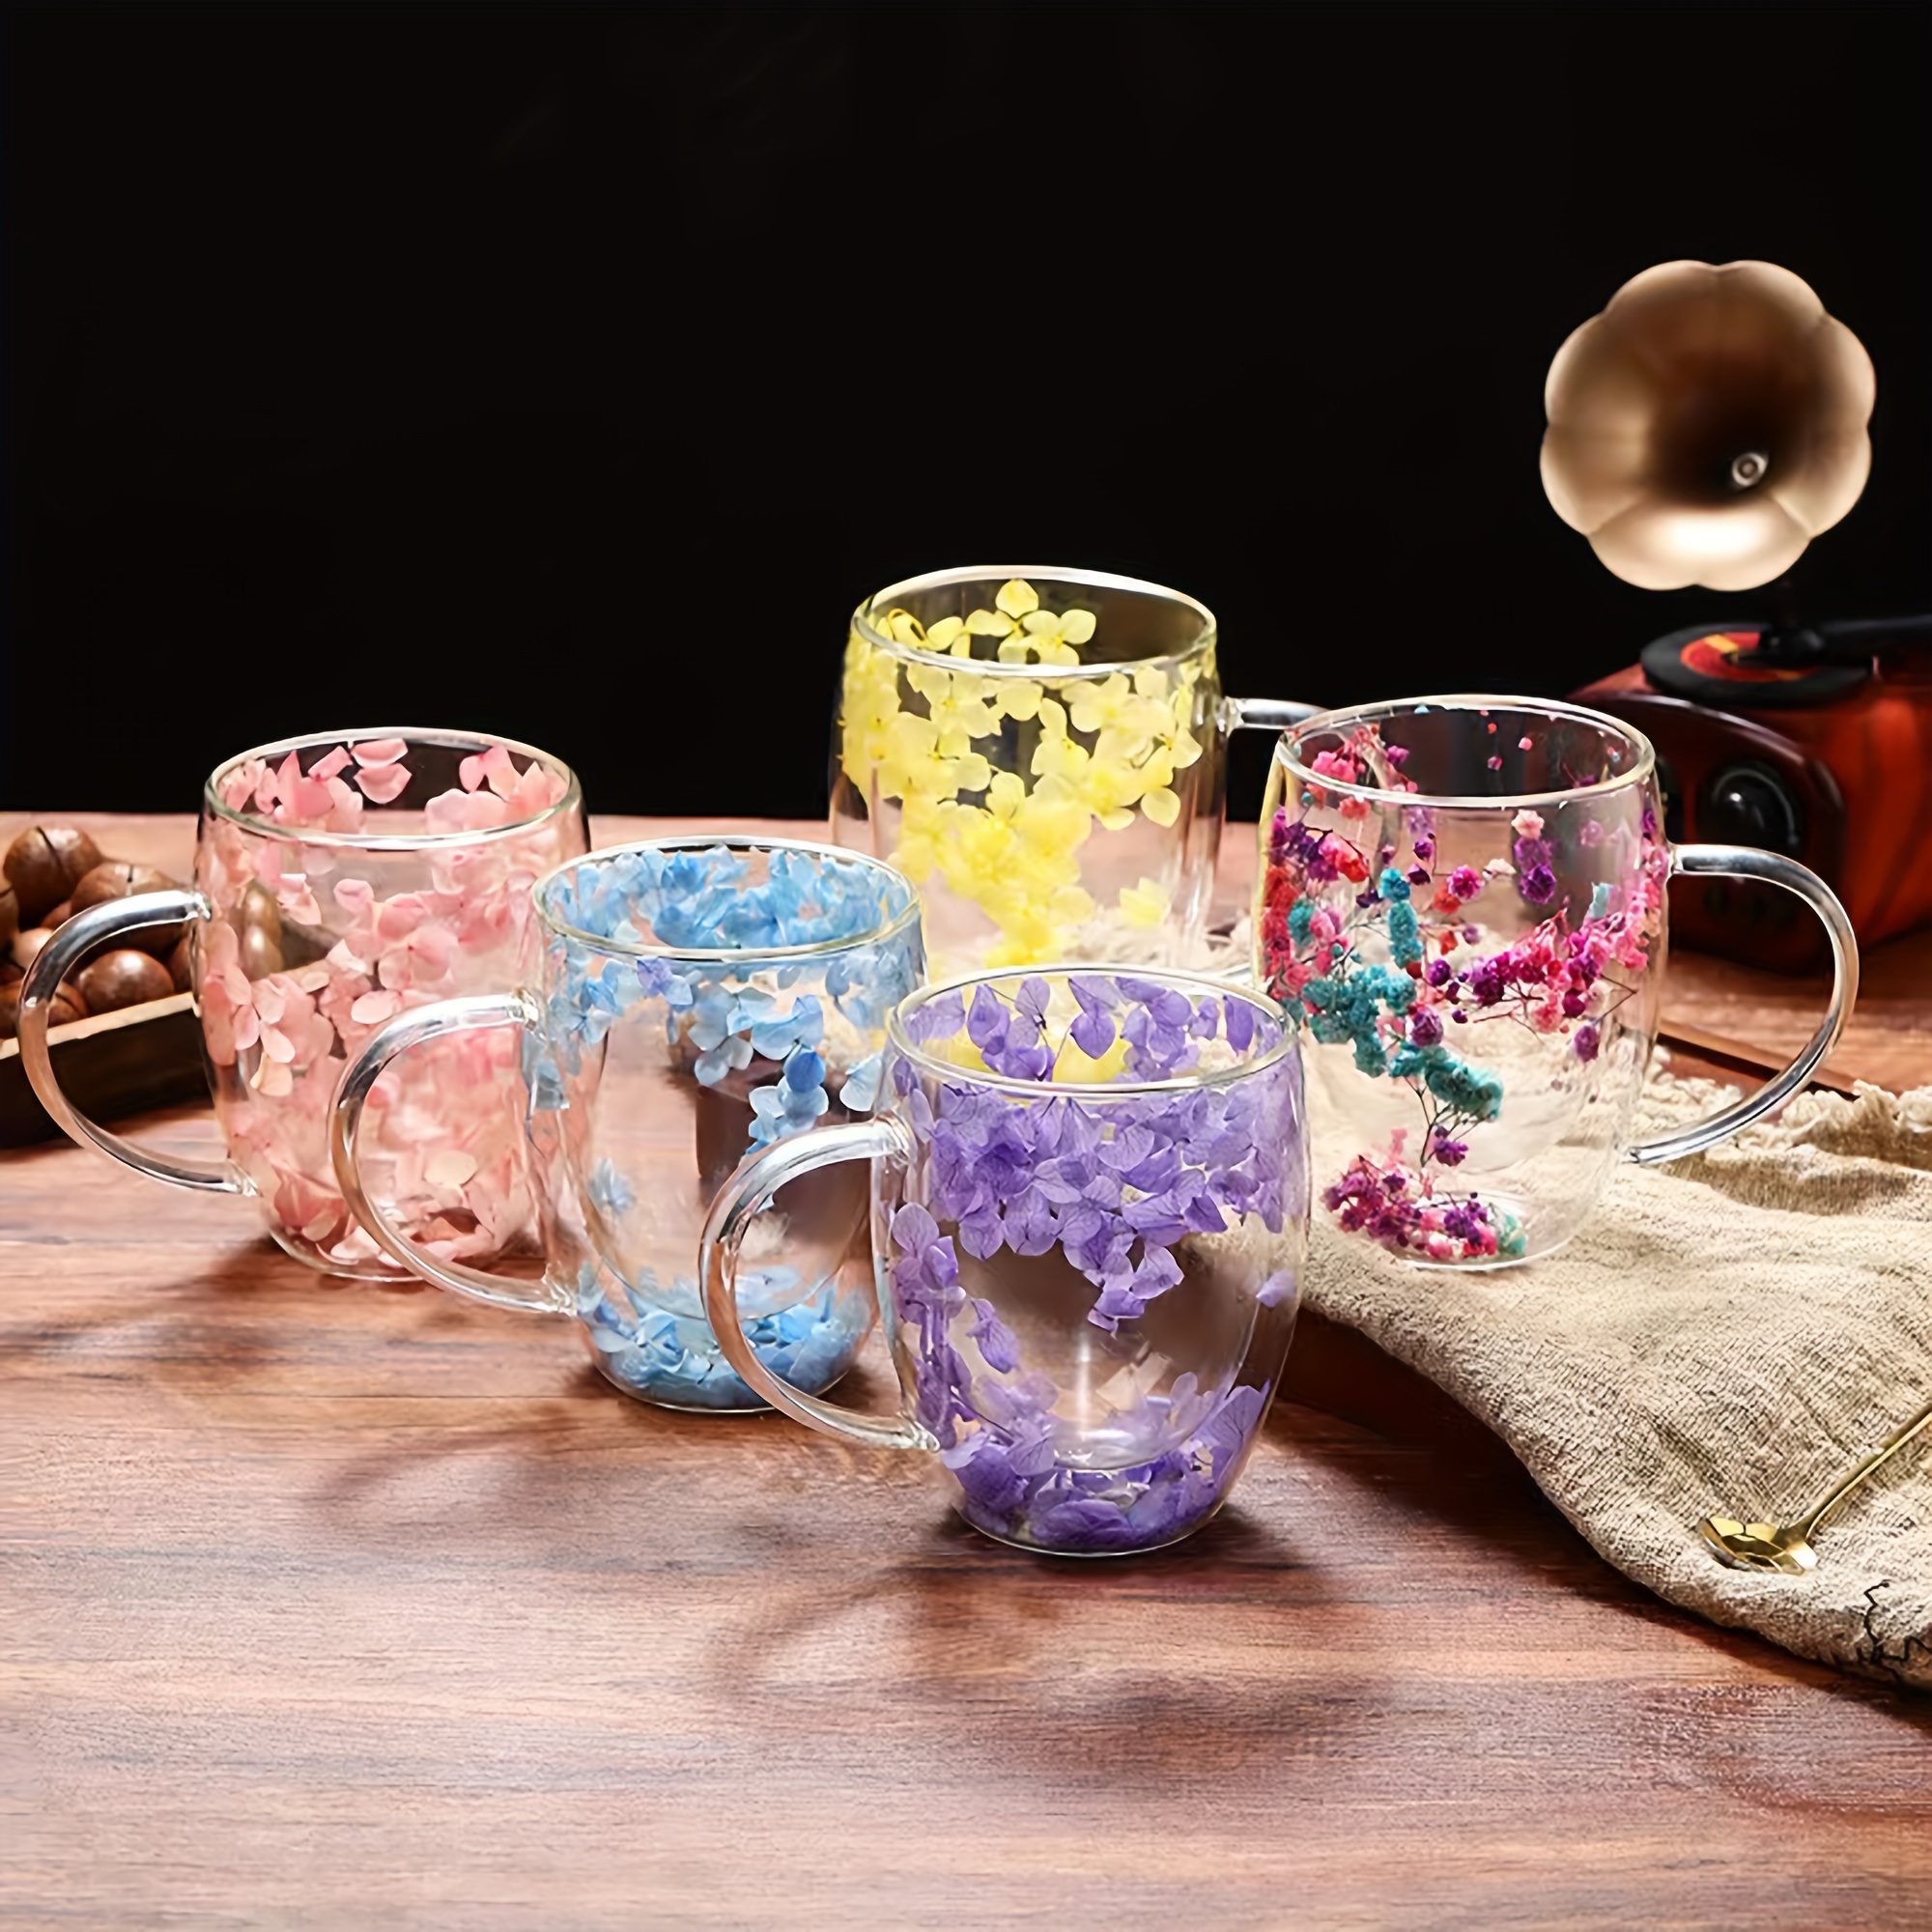 

Glass Cup With Flower Design: Double-walled Insulated Coffee Mug, 350ml/11.84oz, Hand Wash Only